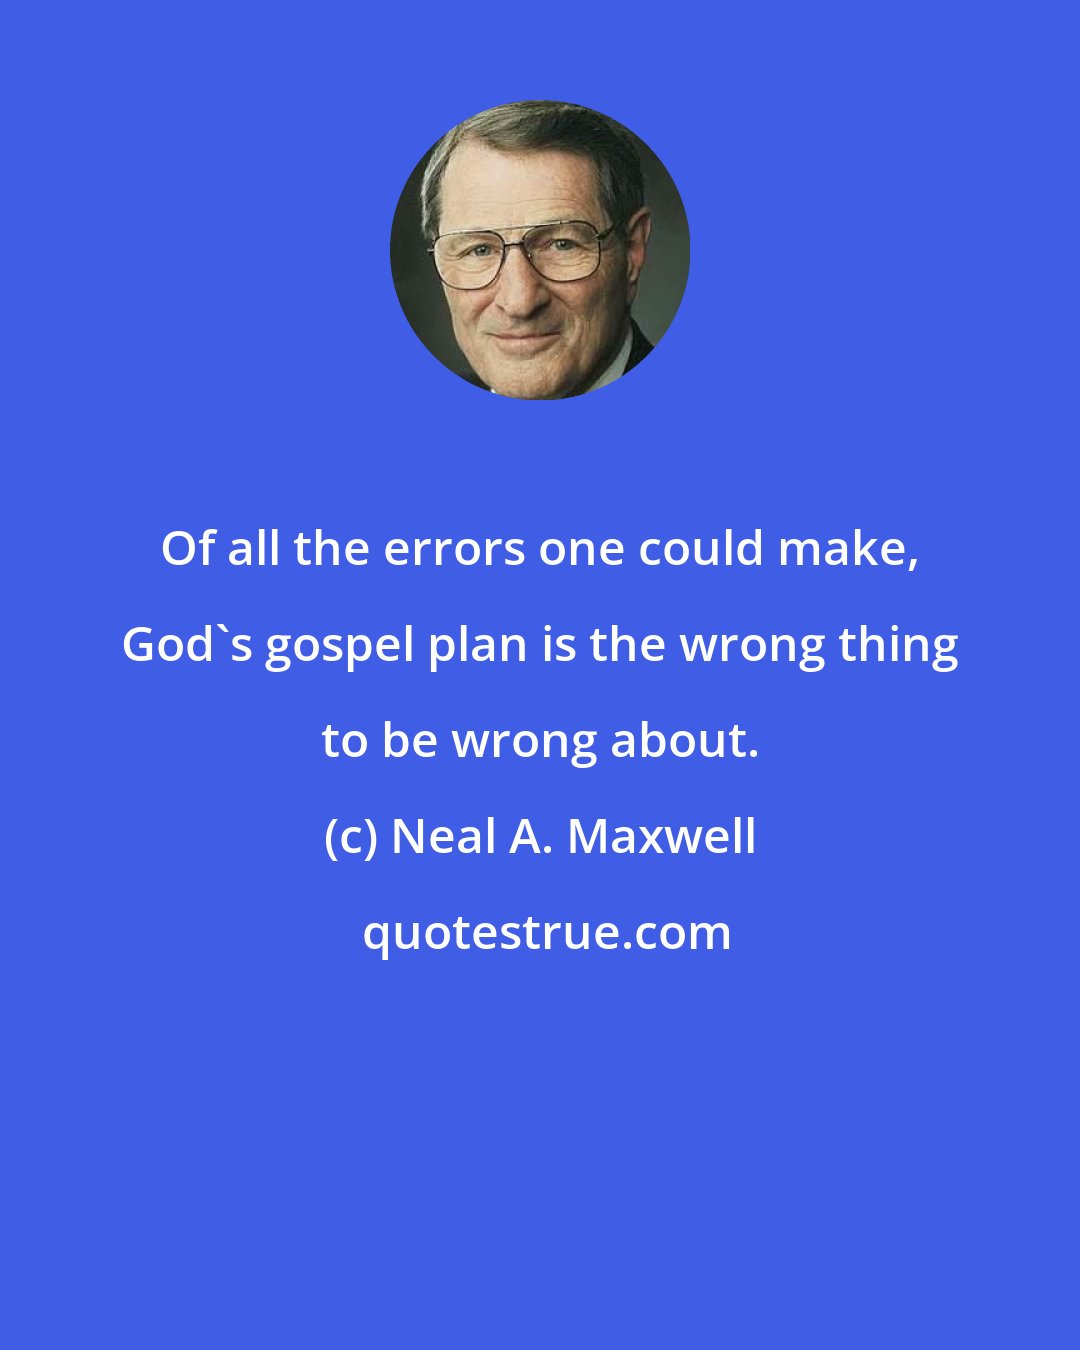 Neal A. Maxwell: Of all the errors one could make, God's gospel plan is the wrong thing to be wrong about.